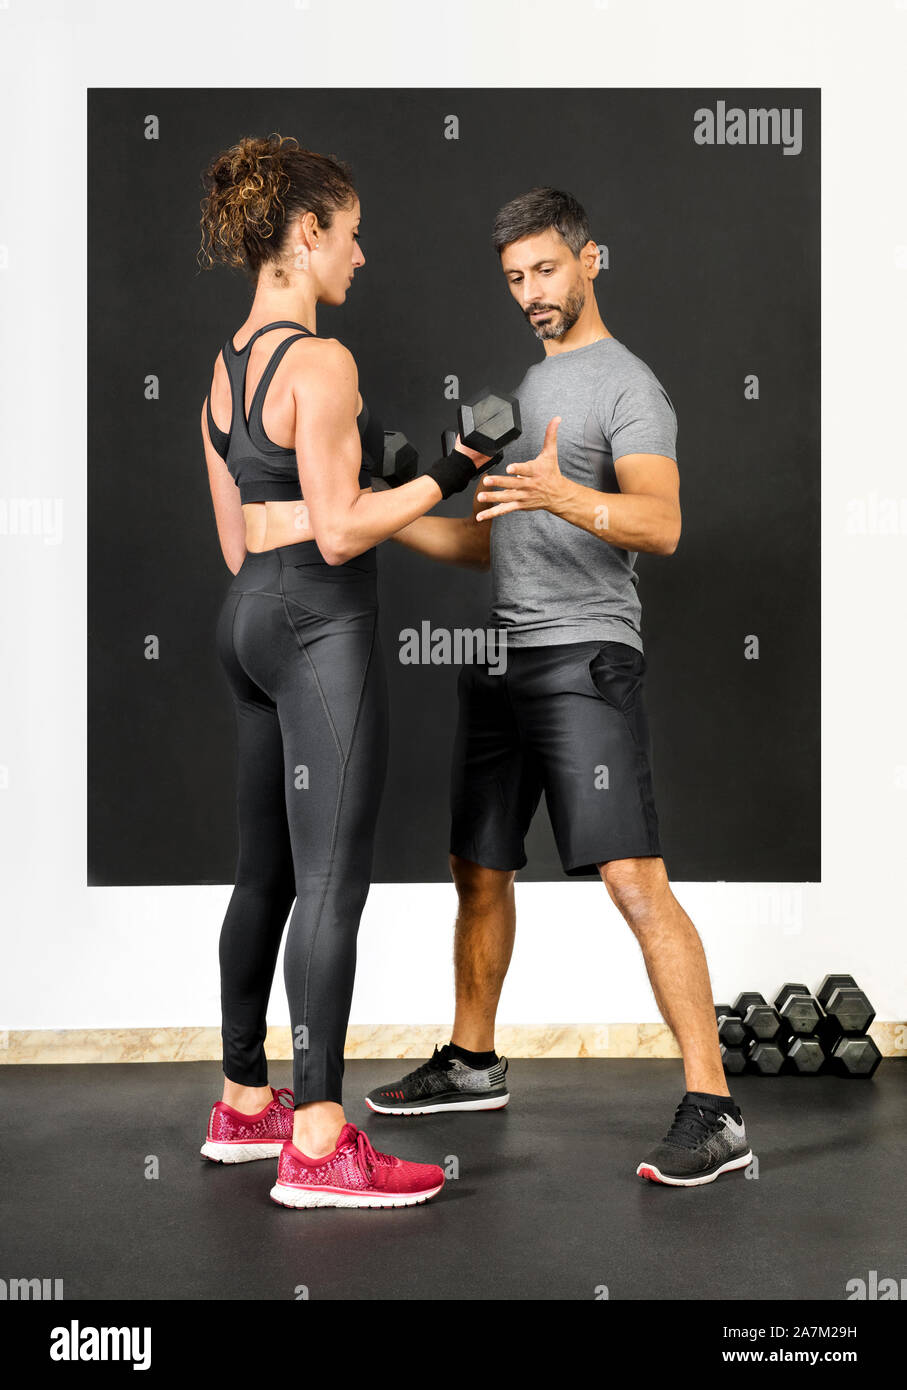 Male personal training assisting a woman with dumbbell weights in a gym as she works out strengthening her muscles in a health and fitness concept Stock Photo